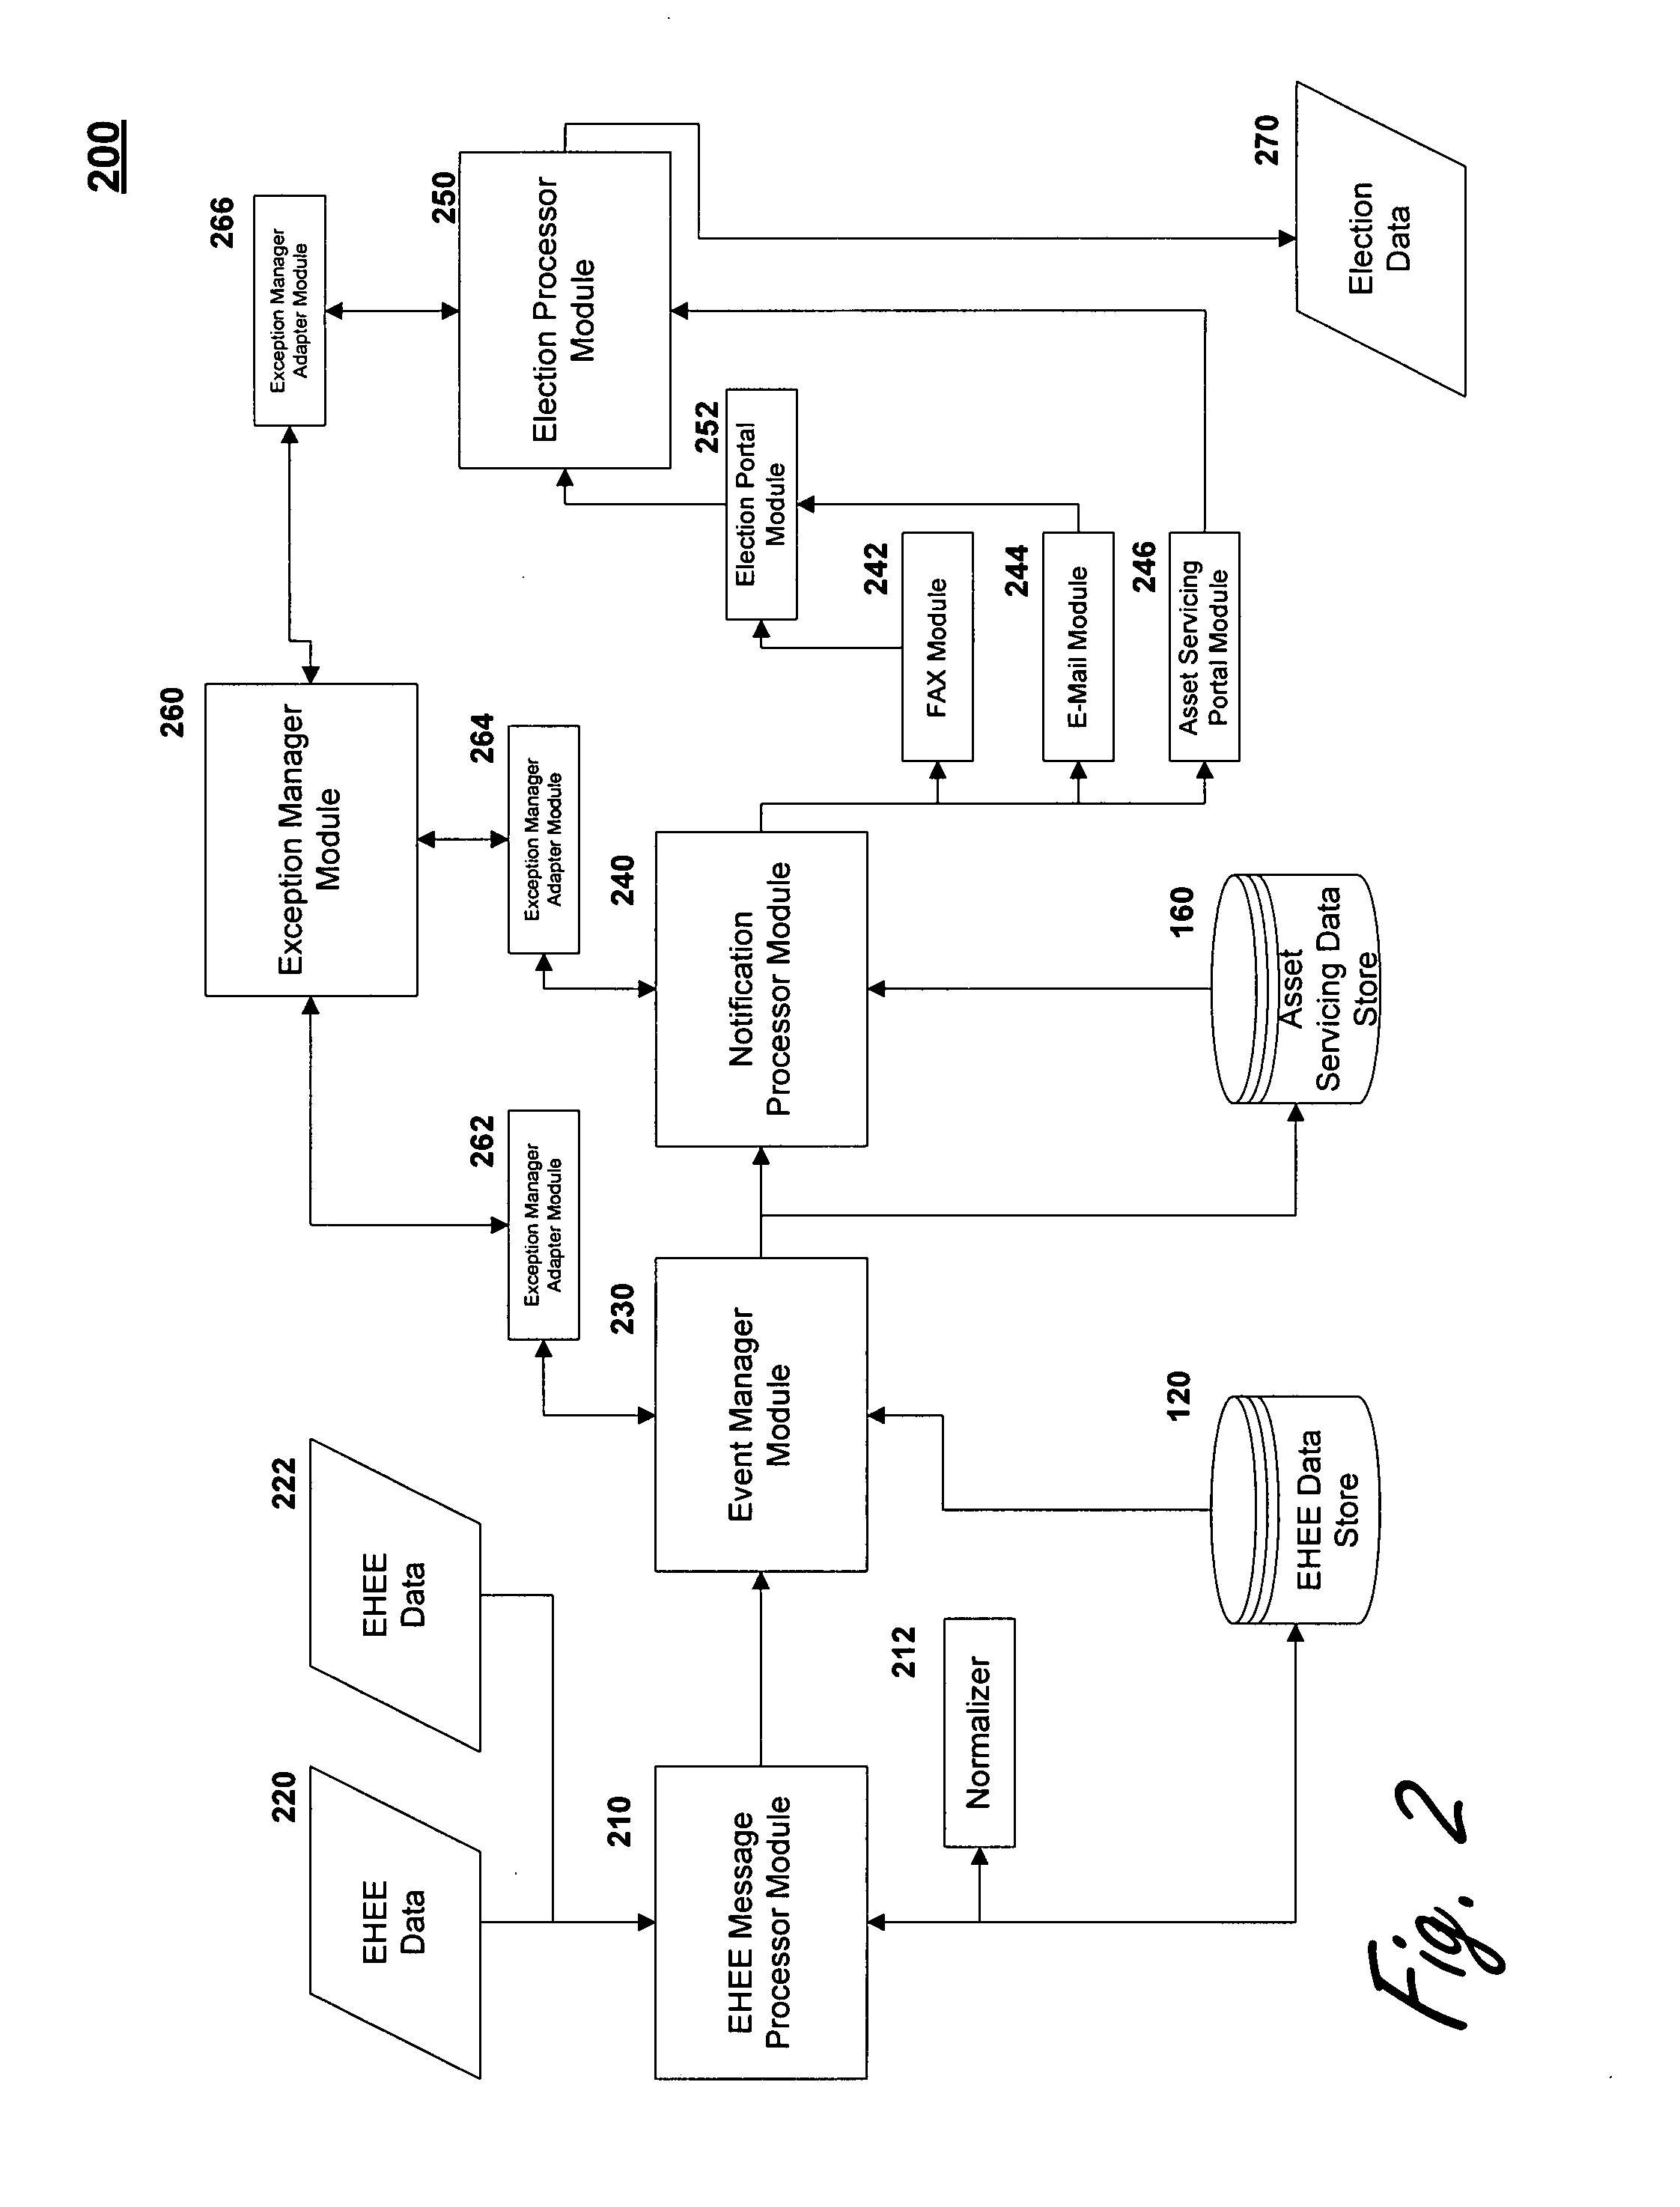 Method and system for processing and communicating corporate action events